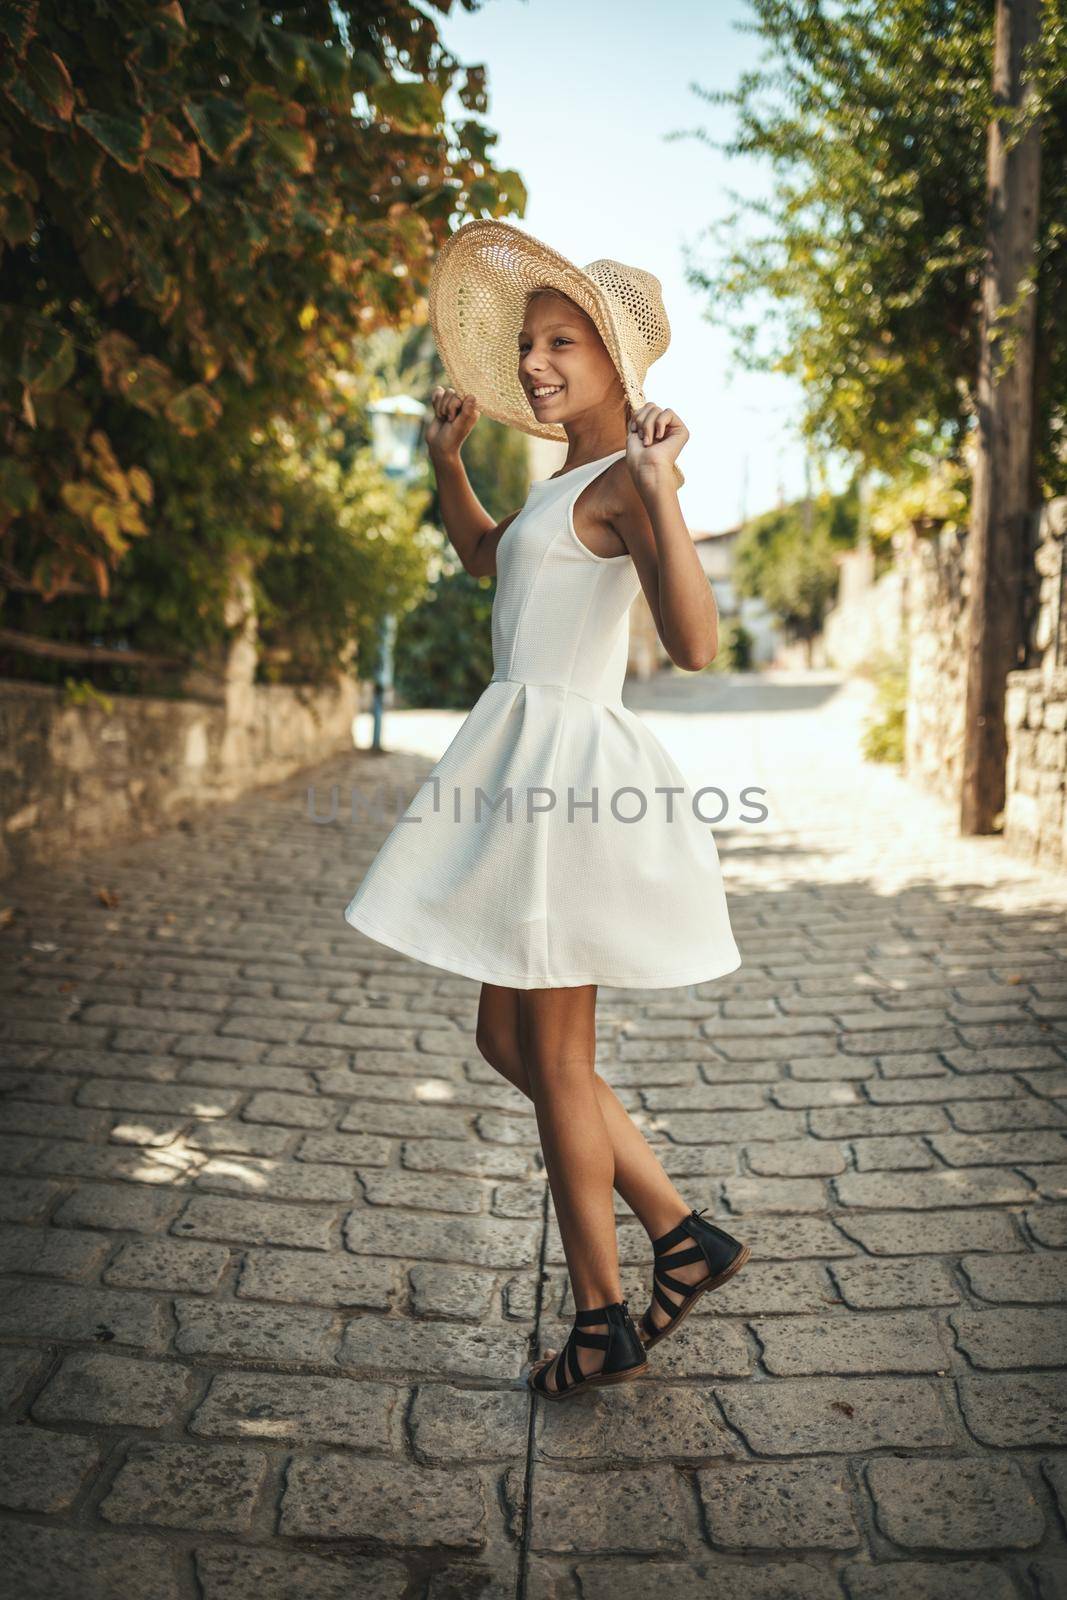 A beautiful teenage girl is walking along the streets of a Mediterranean town and enjoys in summer sunny day. She is smiling, having fun and dancing with straw hat on her head.